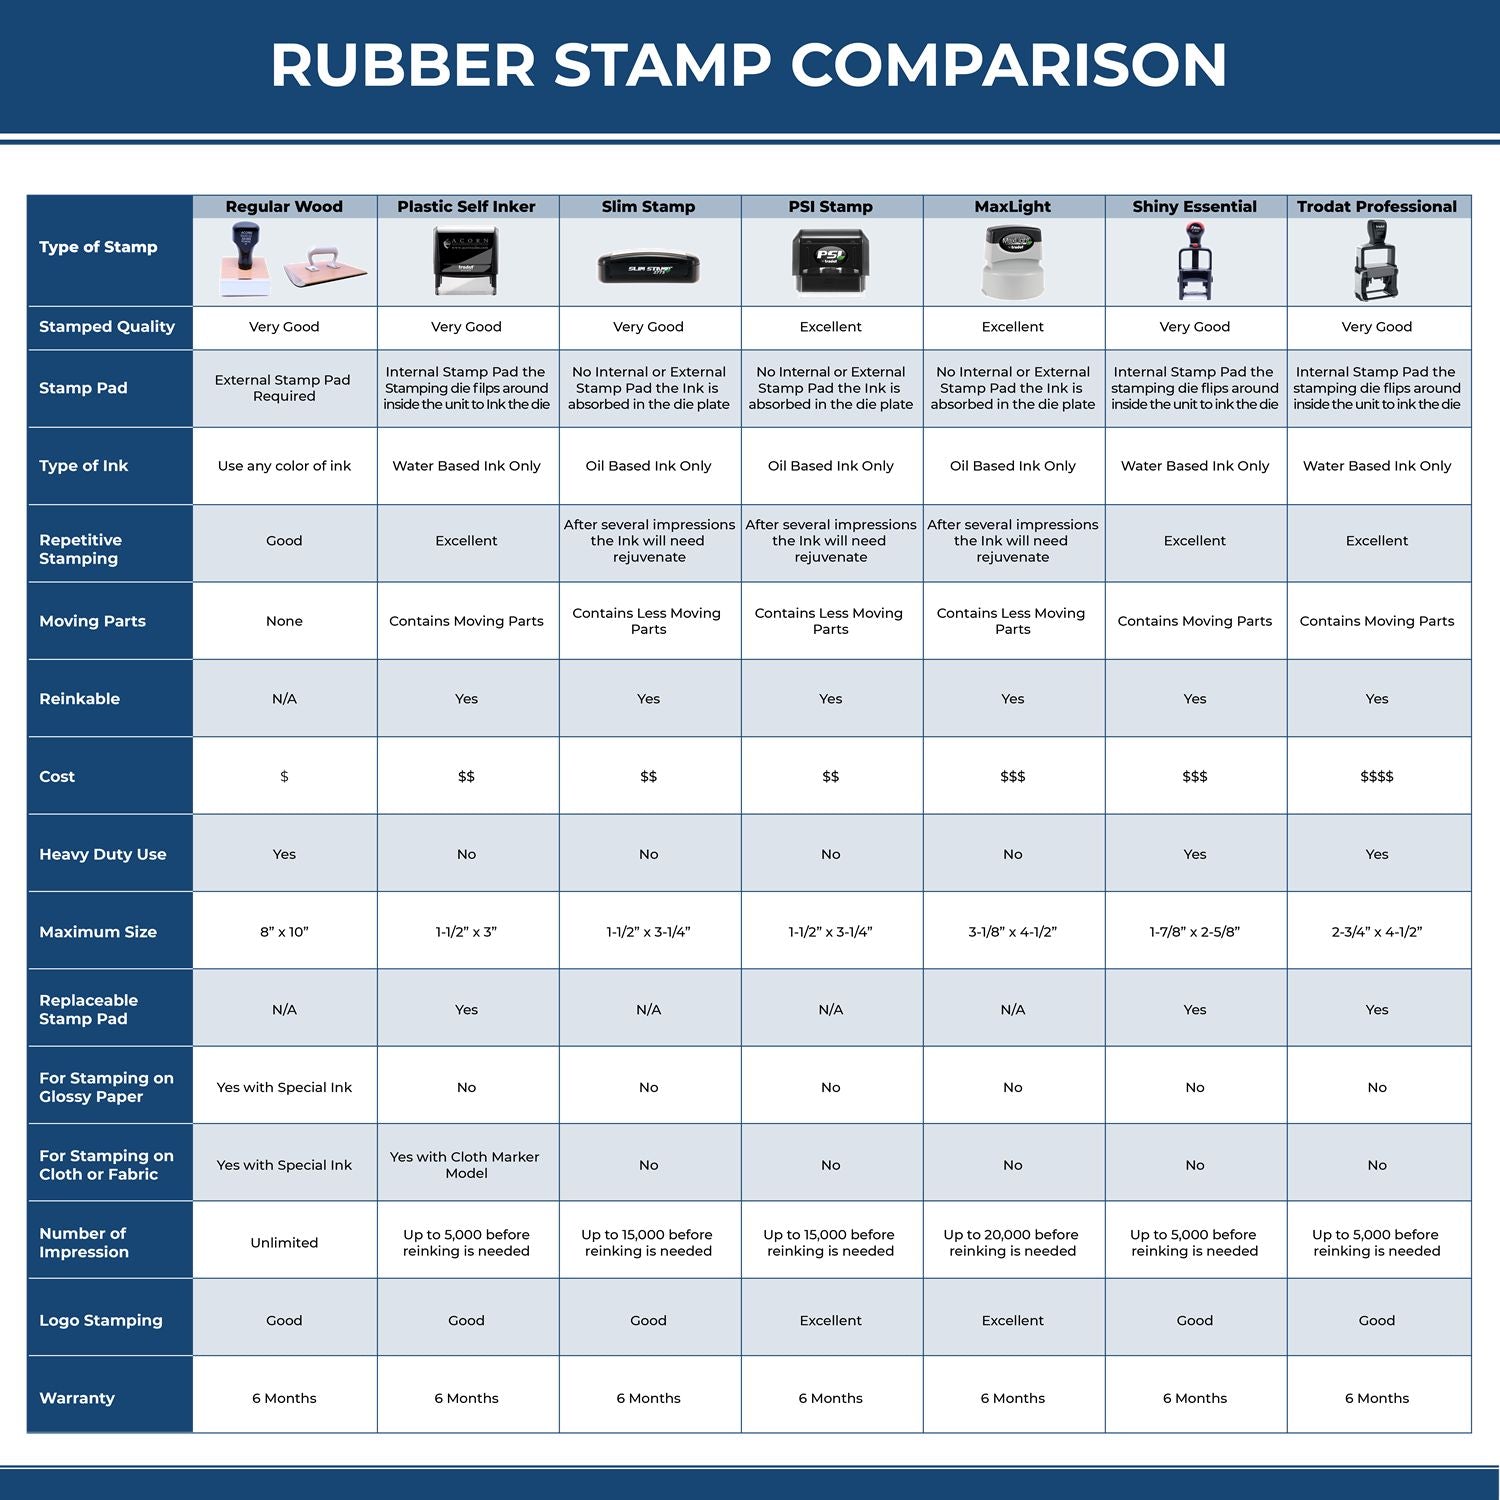 Large Self-Inking Immunocompromised Stamp 4996S Rubber Stamp Comparison